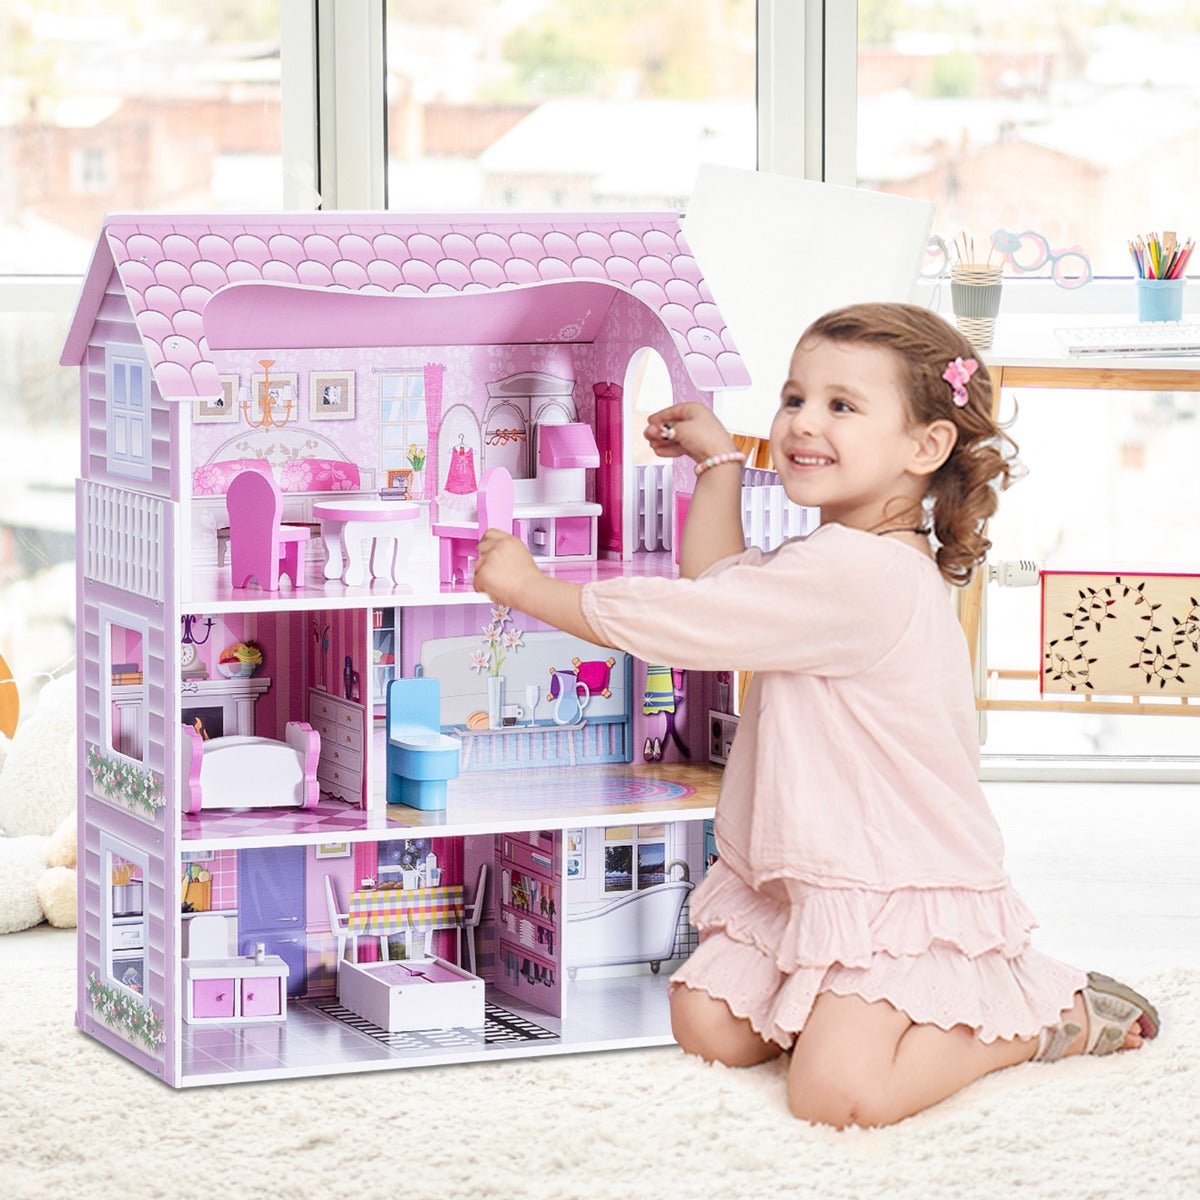 Complete Accessories: Large Wooden Dollhouse for Kids